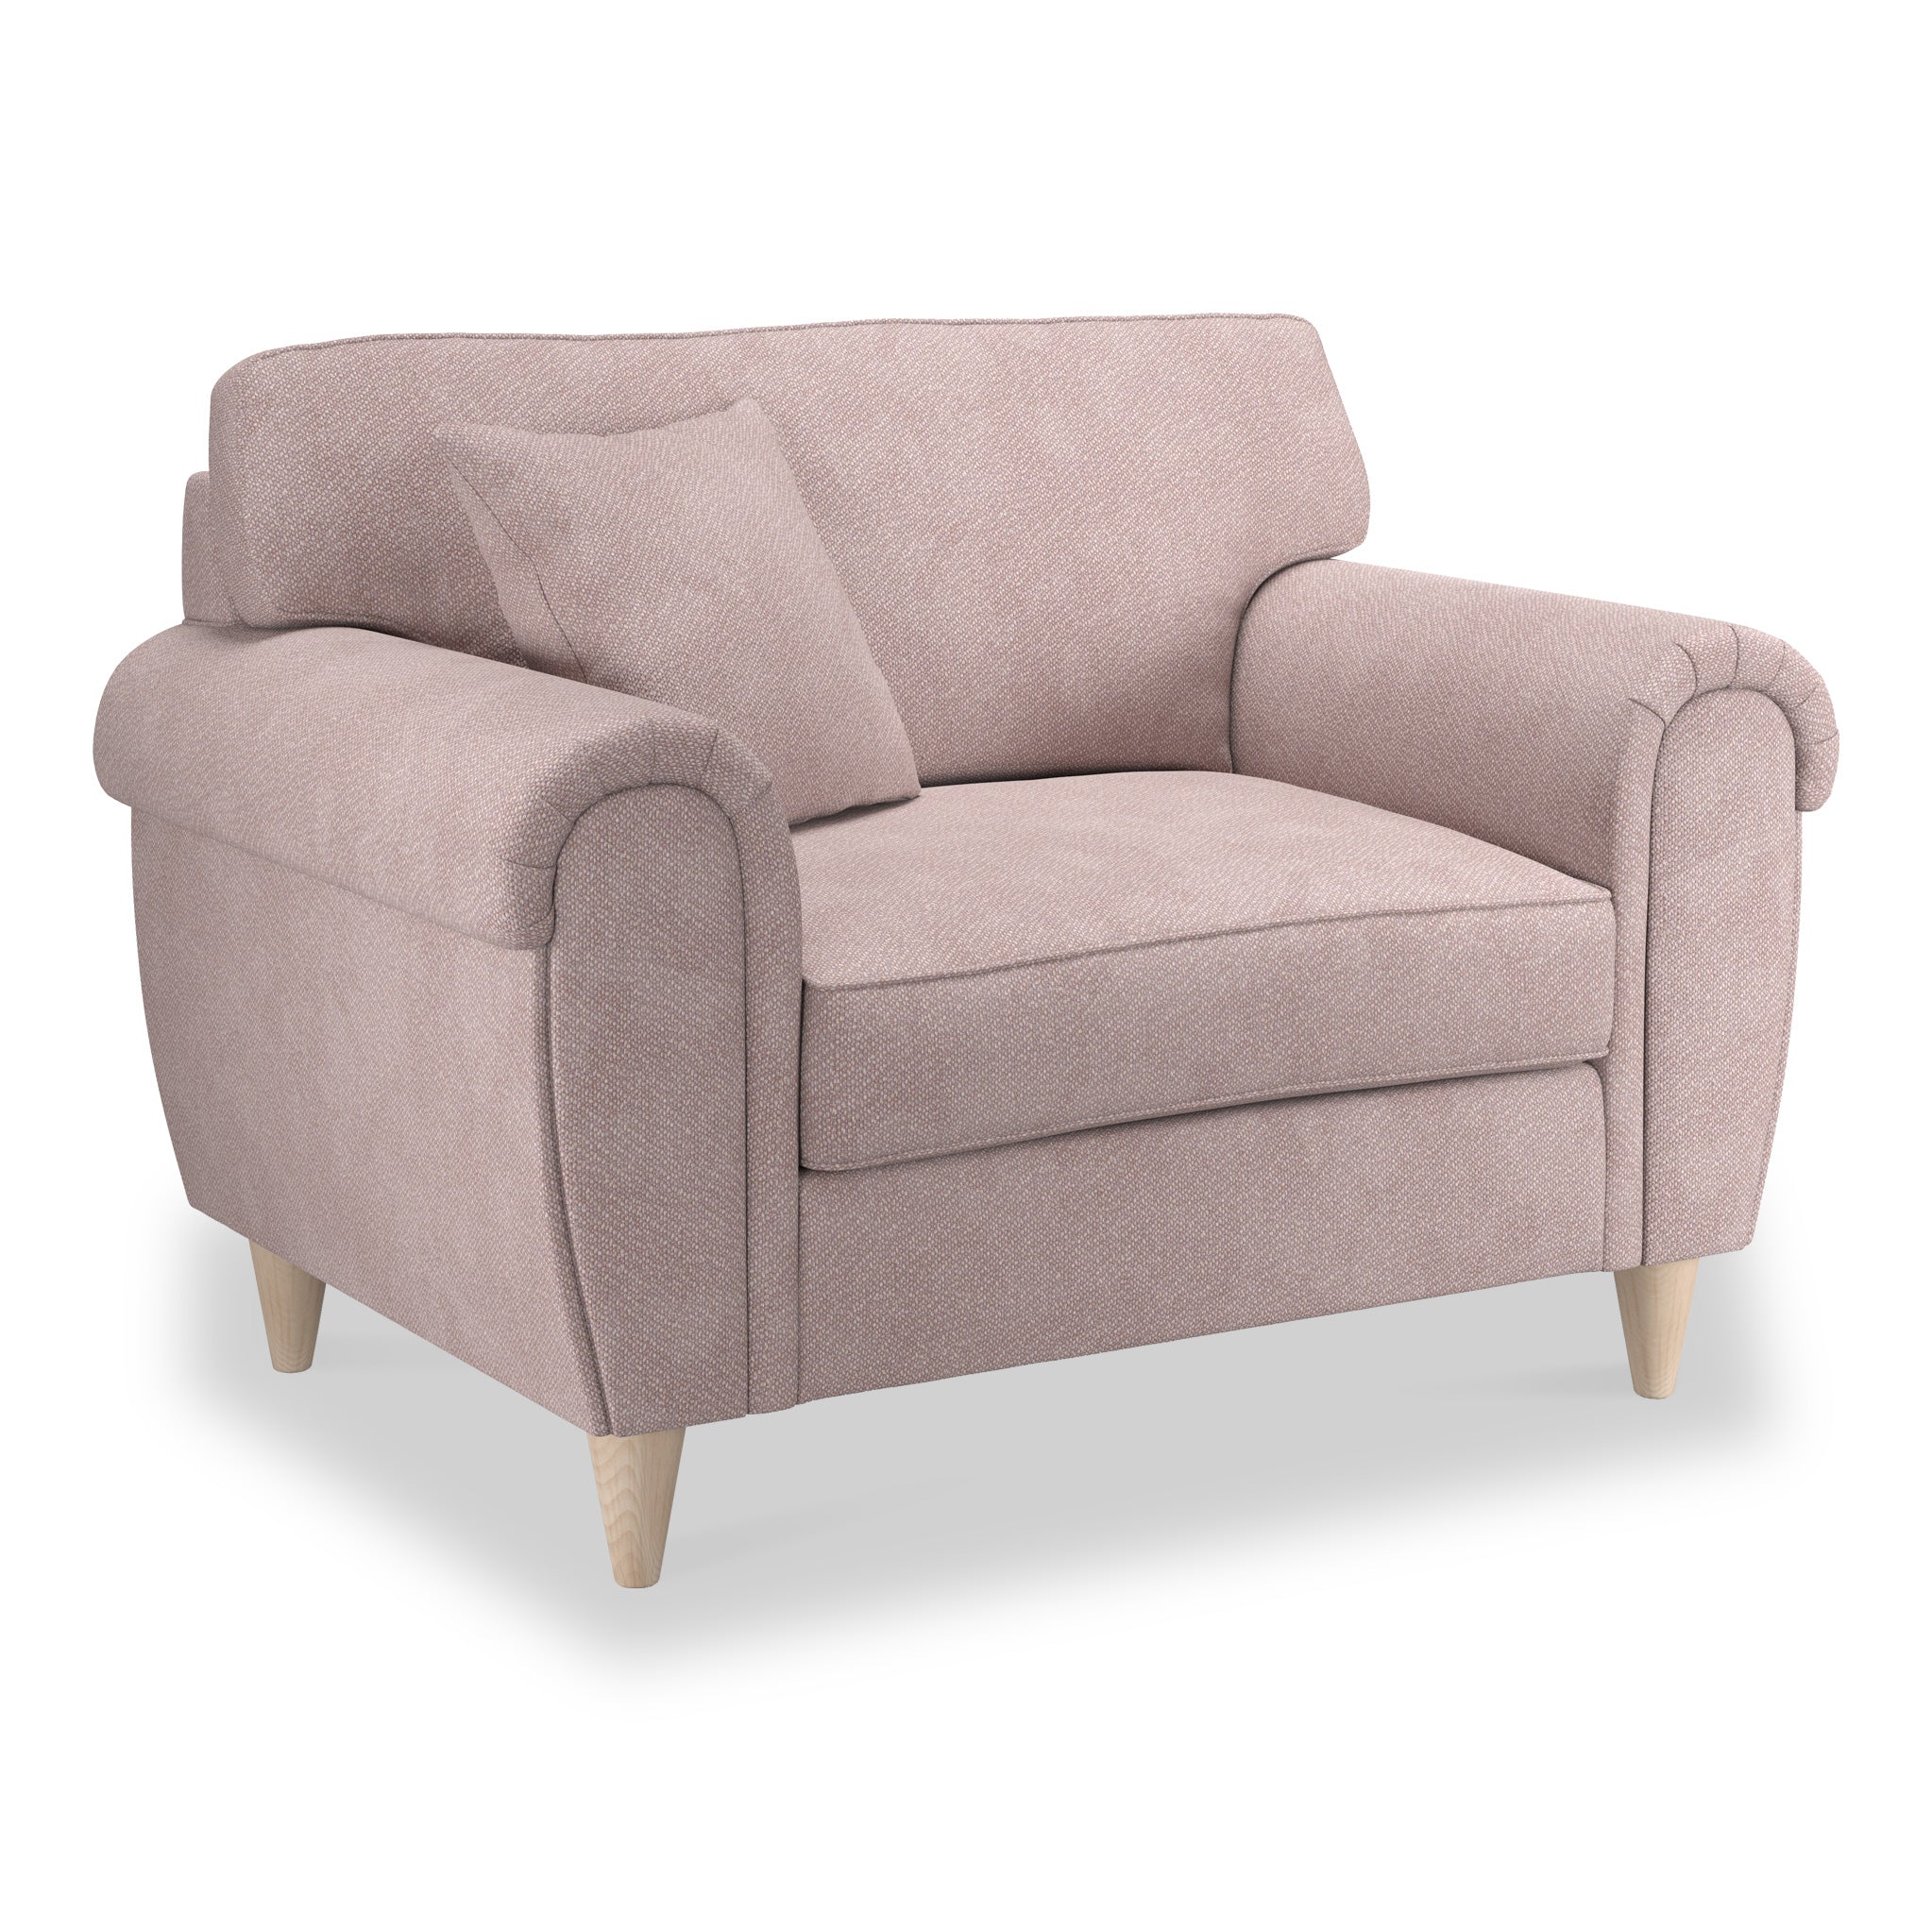 Harry Armchair Contemporary Comfortable Fabric Couch Roseland